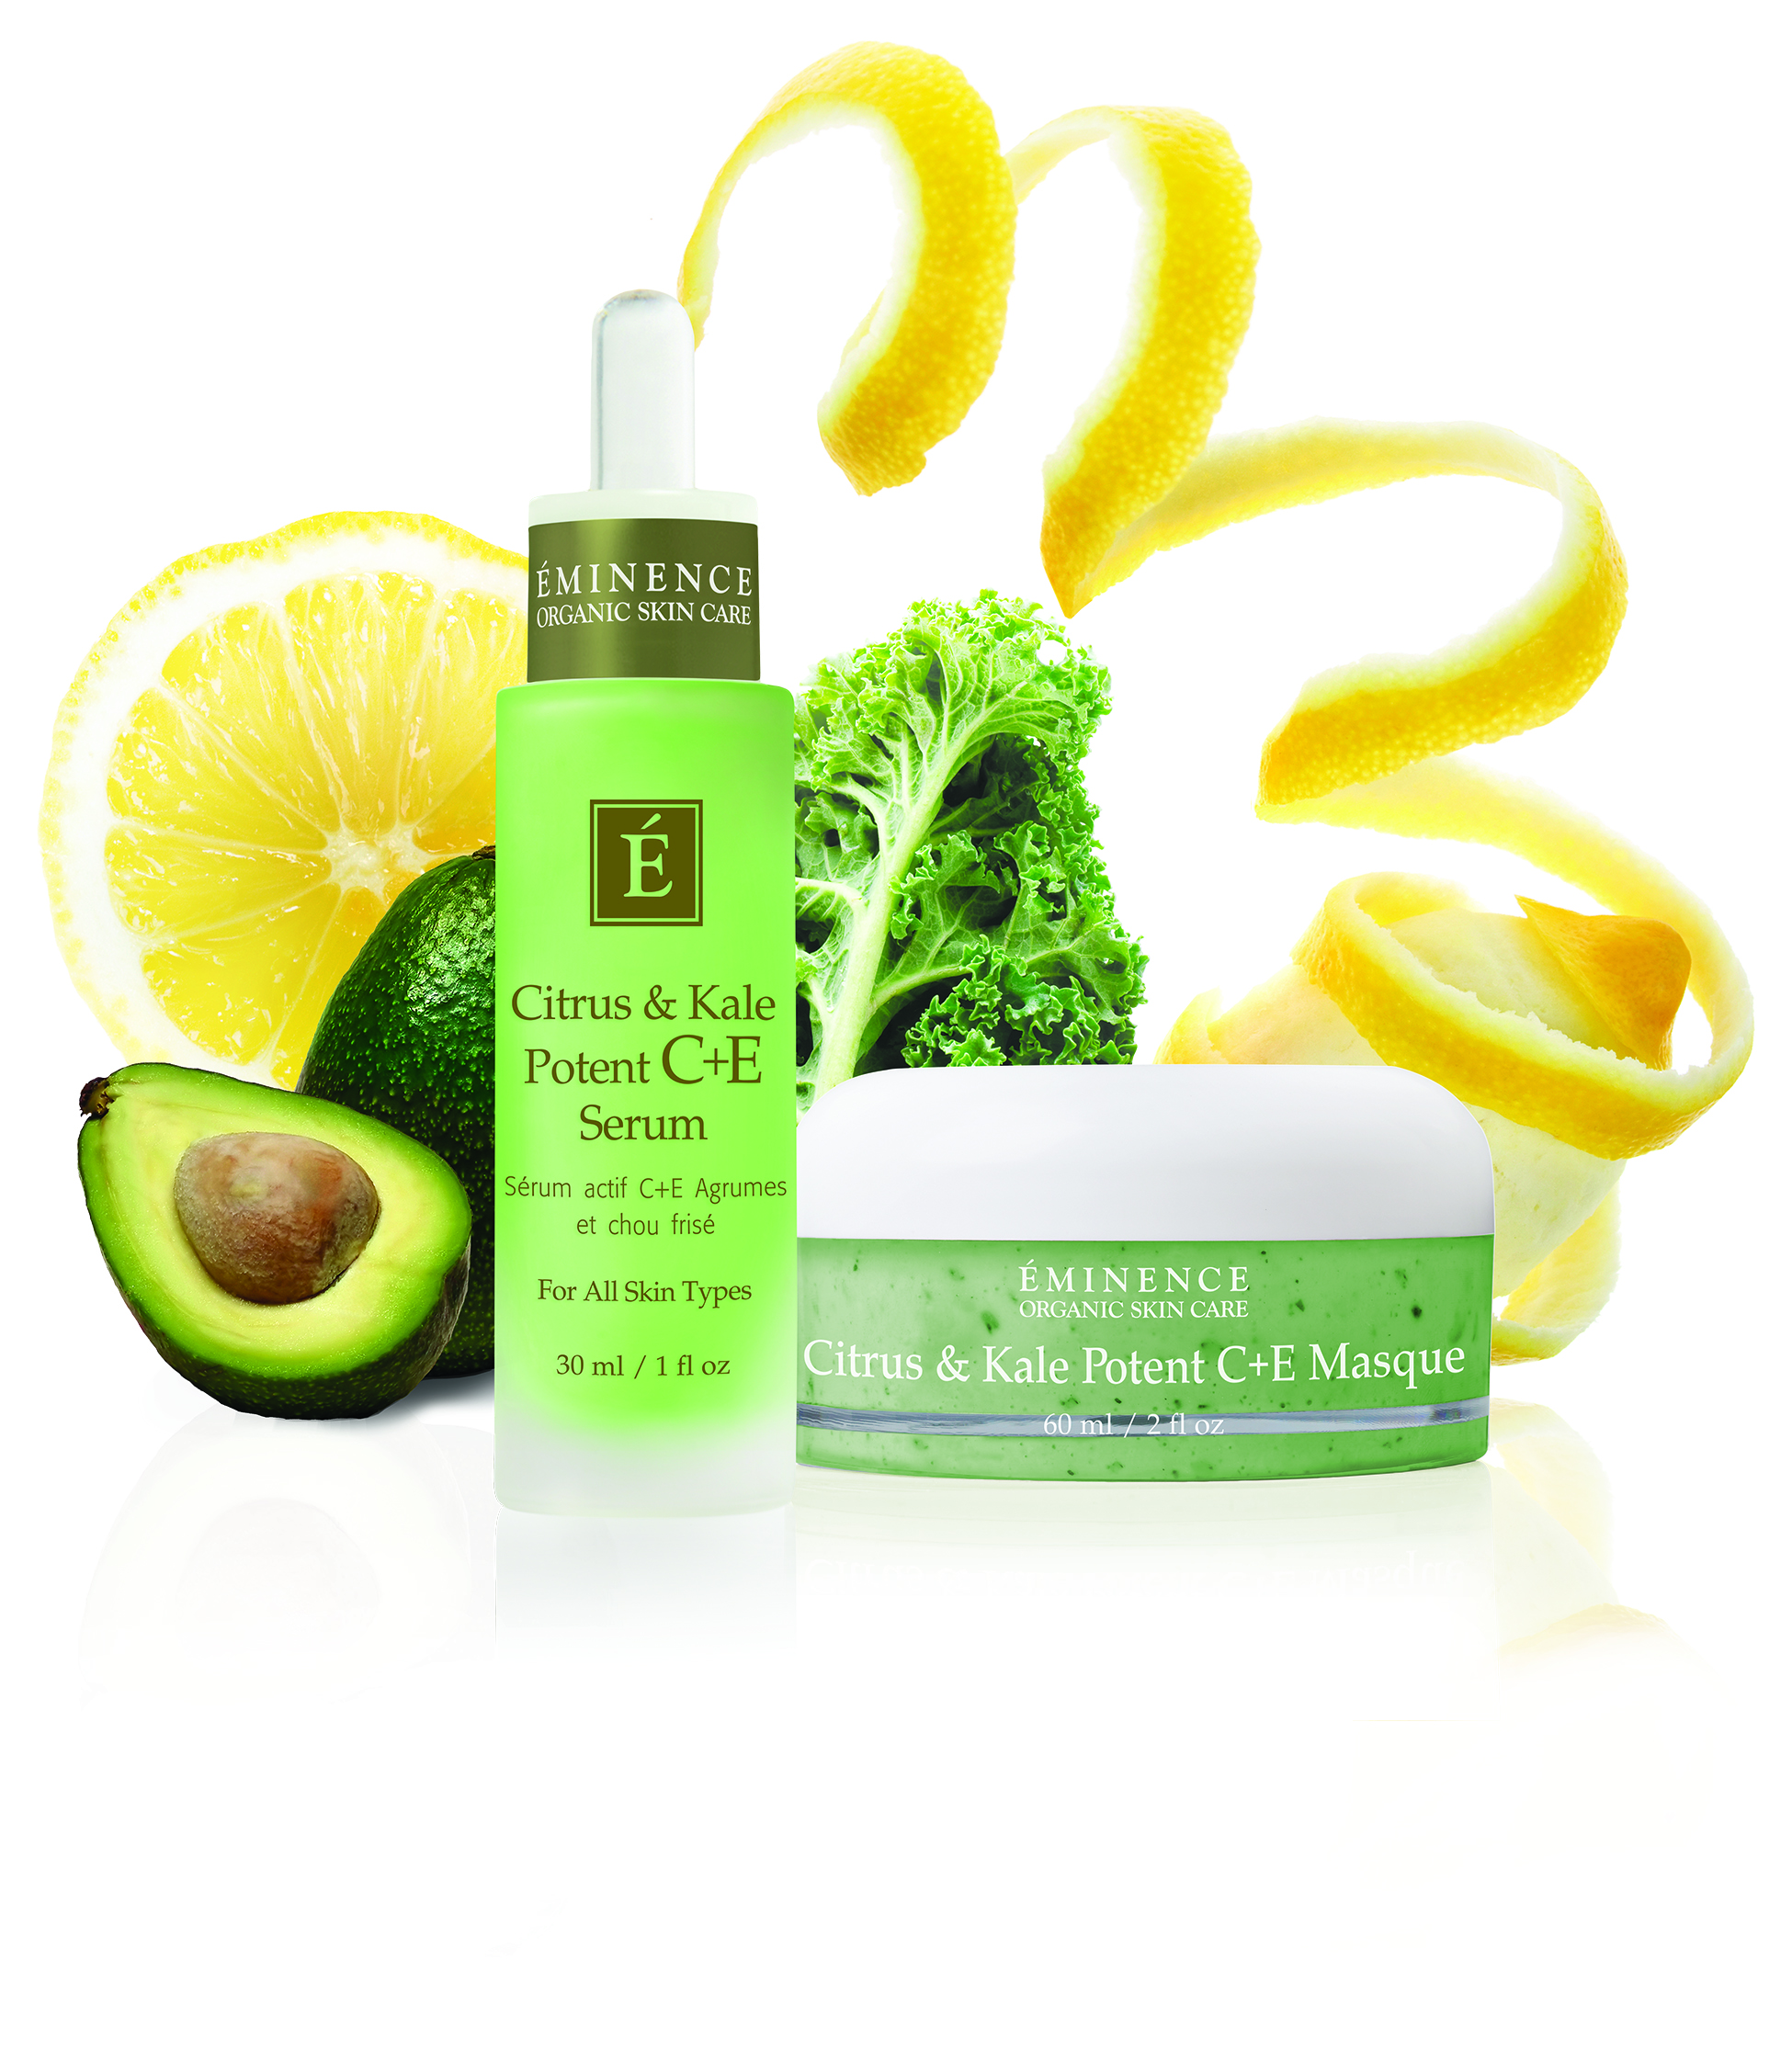 Kale for your face? New Eminence Organics skin care products are a new way to get your greens.